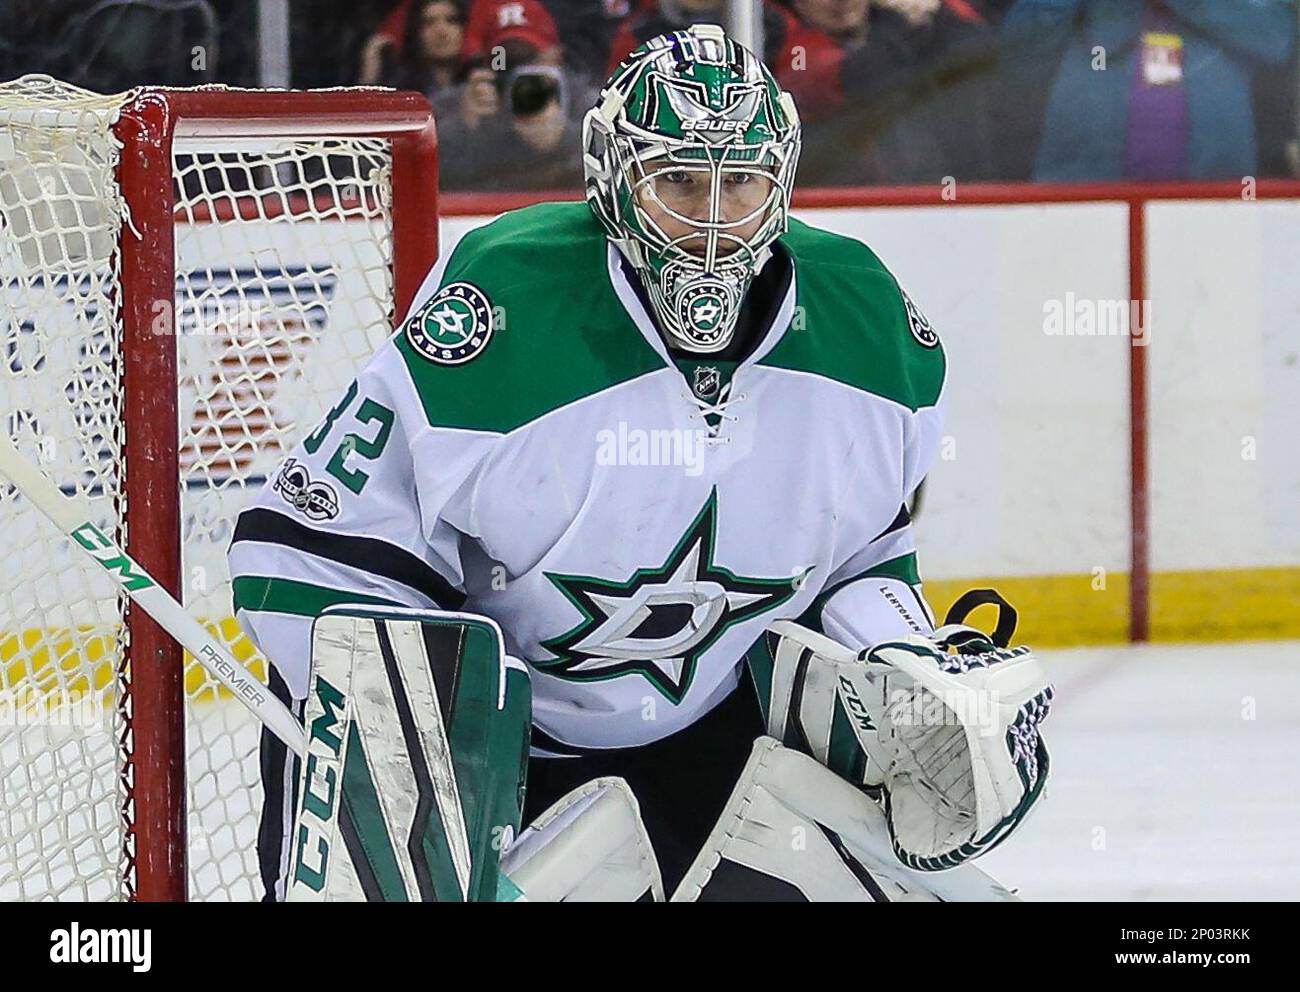 March 26, 2017: Dallas Stars goalie Kari Lehtonen (32) keeps his eye on the puck during the second period of an NHL game between the Dallas Stars and the New Jersey Devils at The Prudential Center in Newark, NJ. Dallas won in OT, 2-1. Mike Langish/Cal Sport Media. (Cal Sport Media via AP Images) Stock Photo